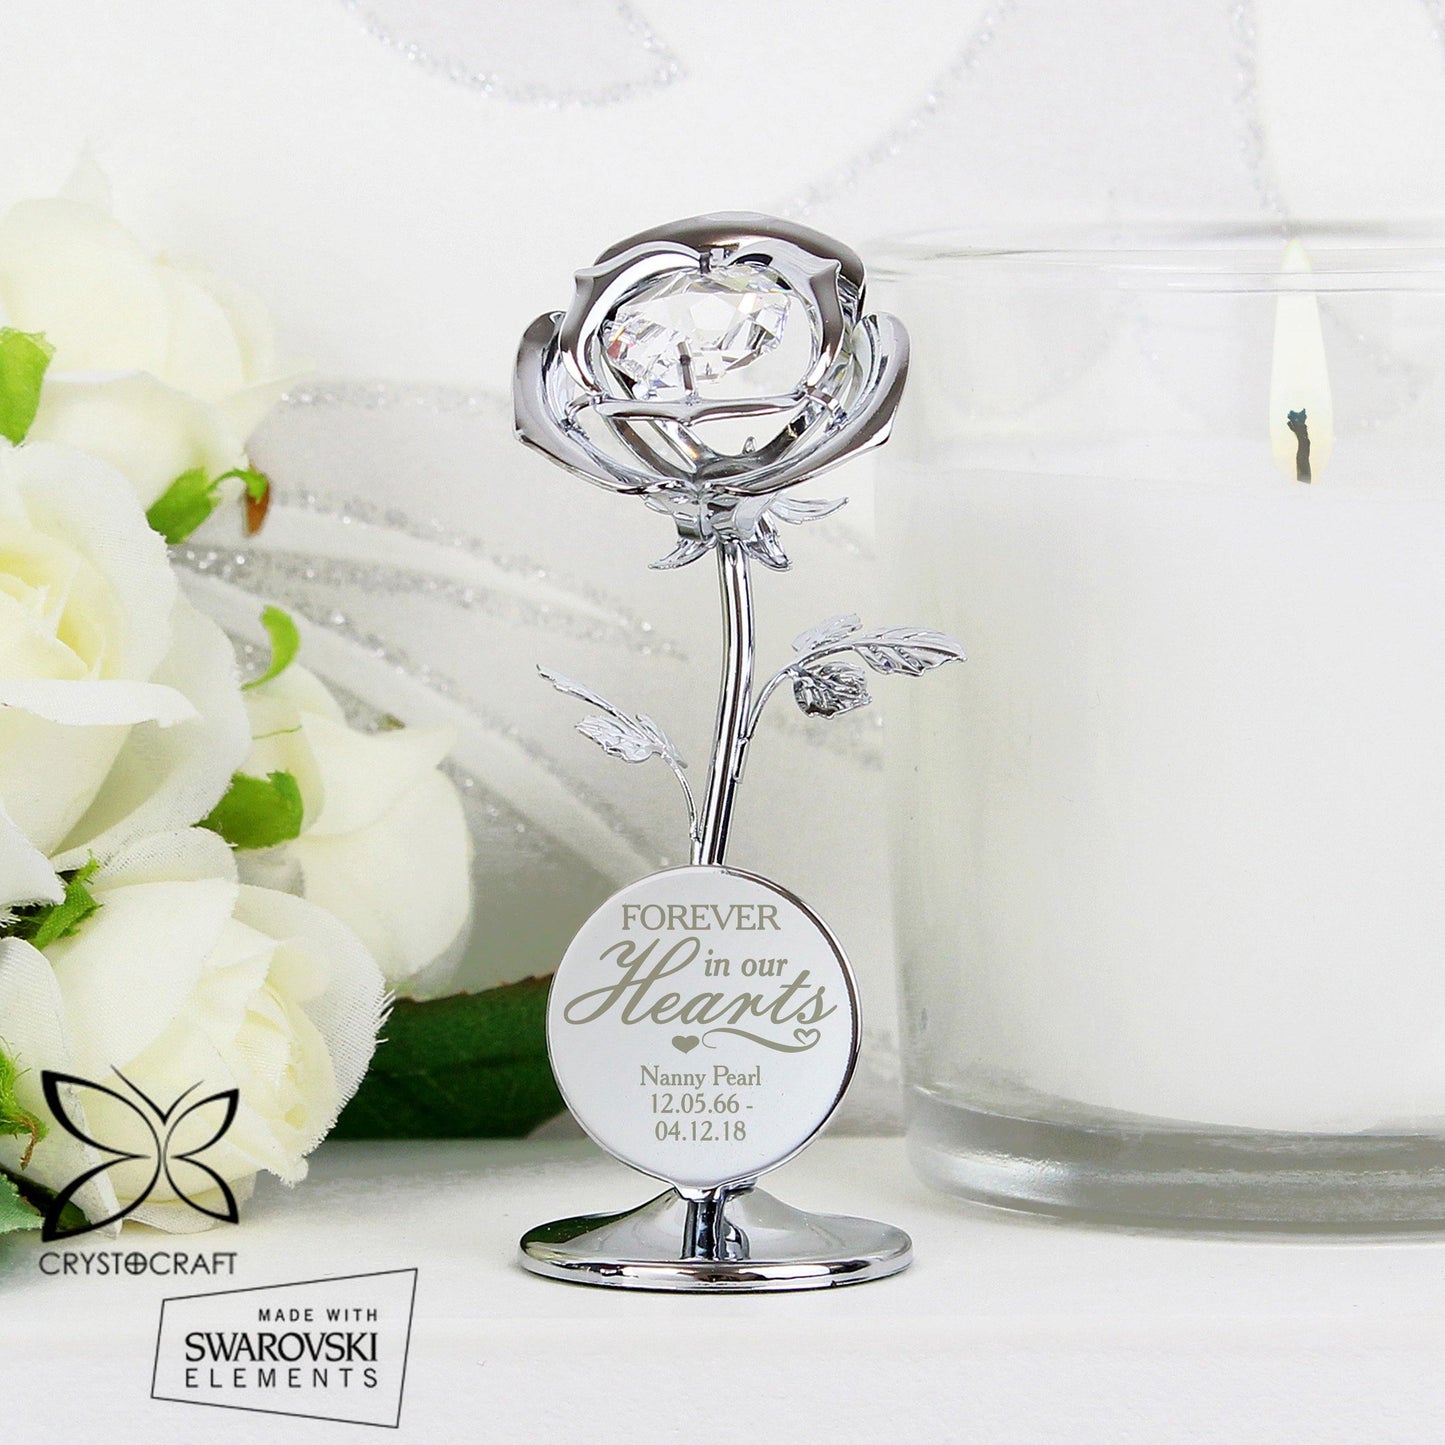 Personalised Silver Forever in Our Hearts Crystocraft Rose Ornament - Kporium Home & Garden